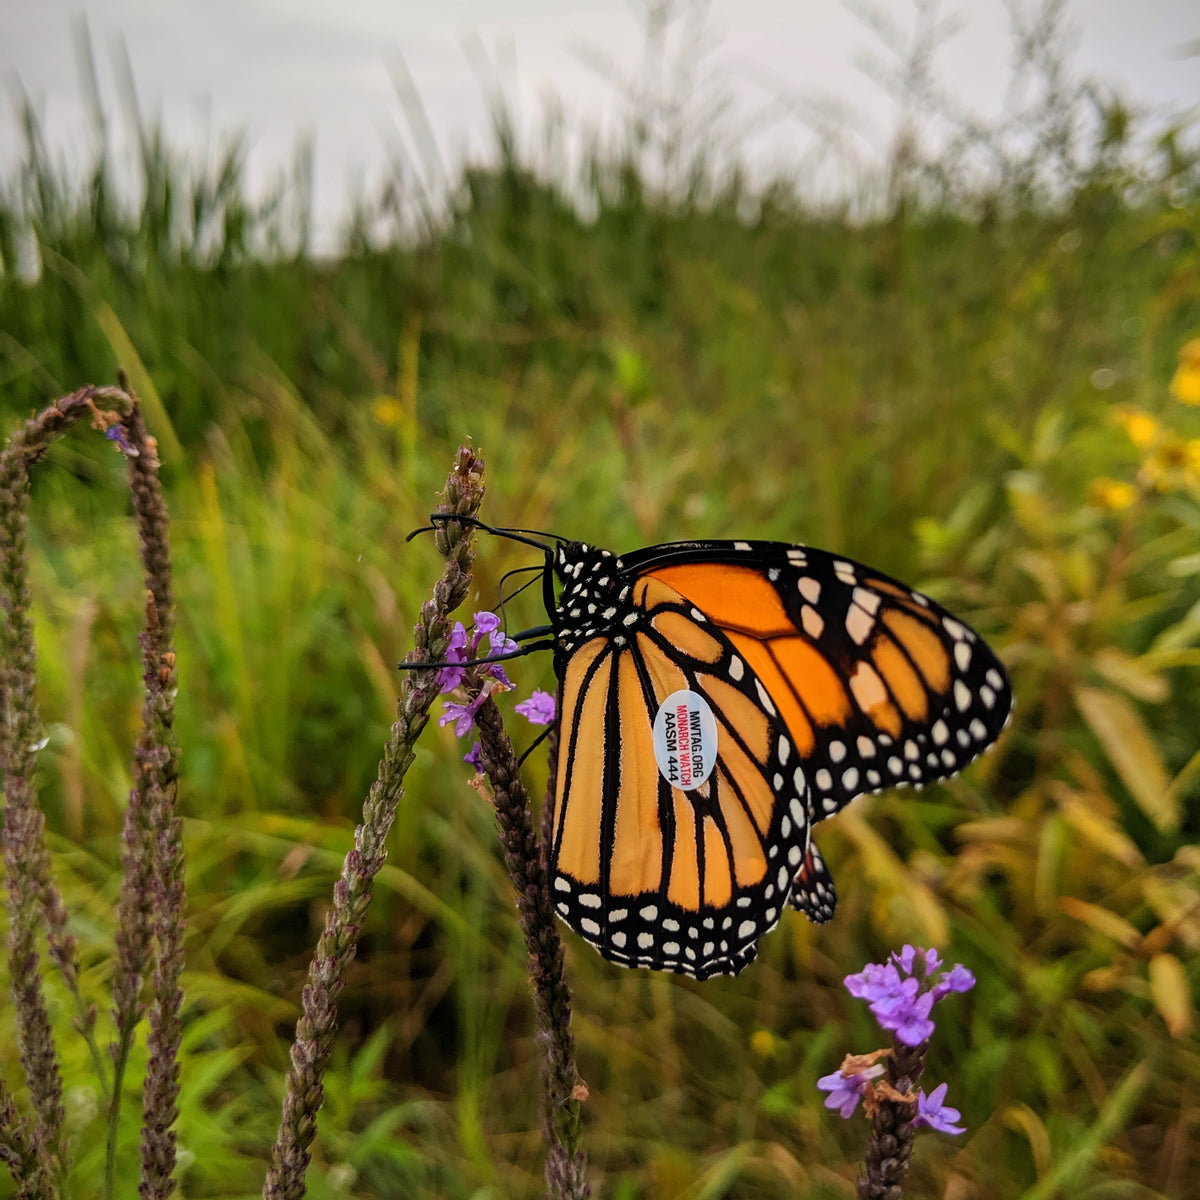 A monach butterfly perched on a vervain plant in a wetland area. The monarch butterfly has a Monarch Watch tag on its wing as part of a monarch butterfly conservation program.